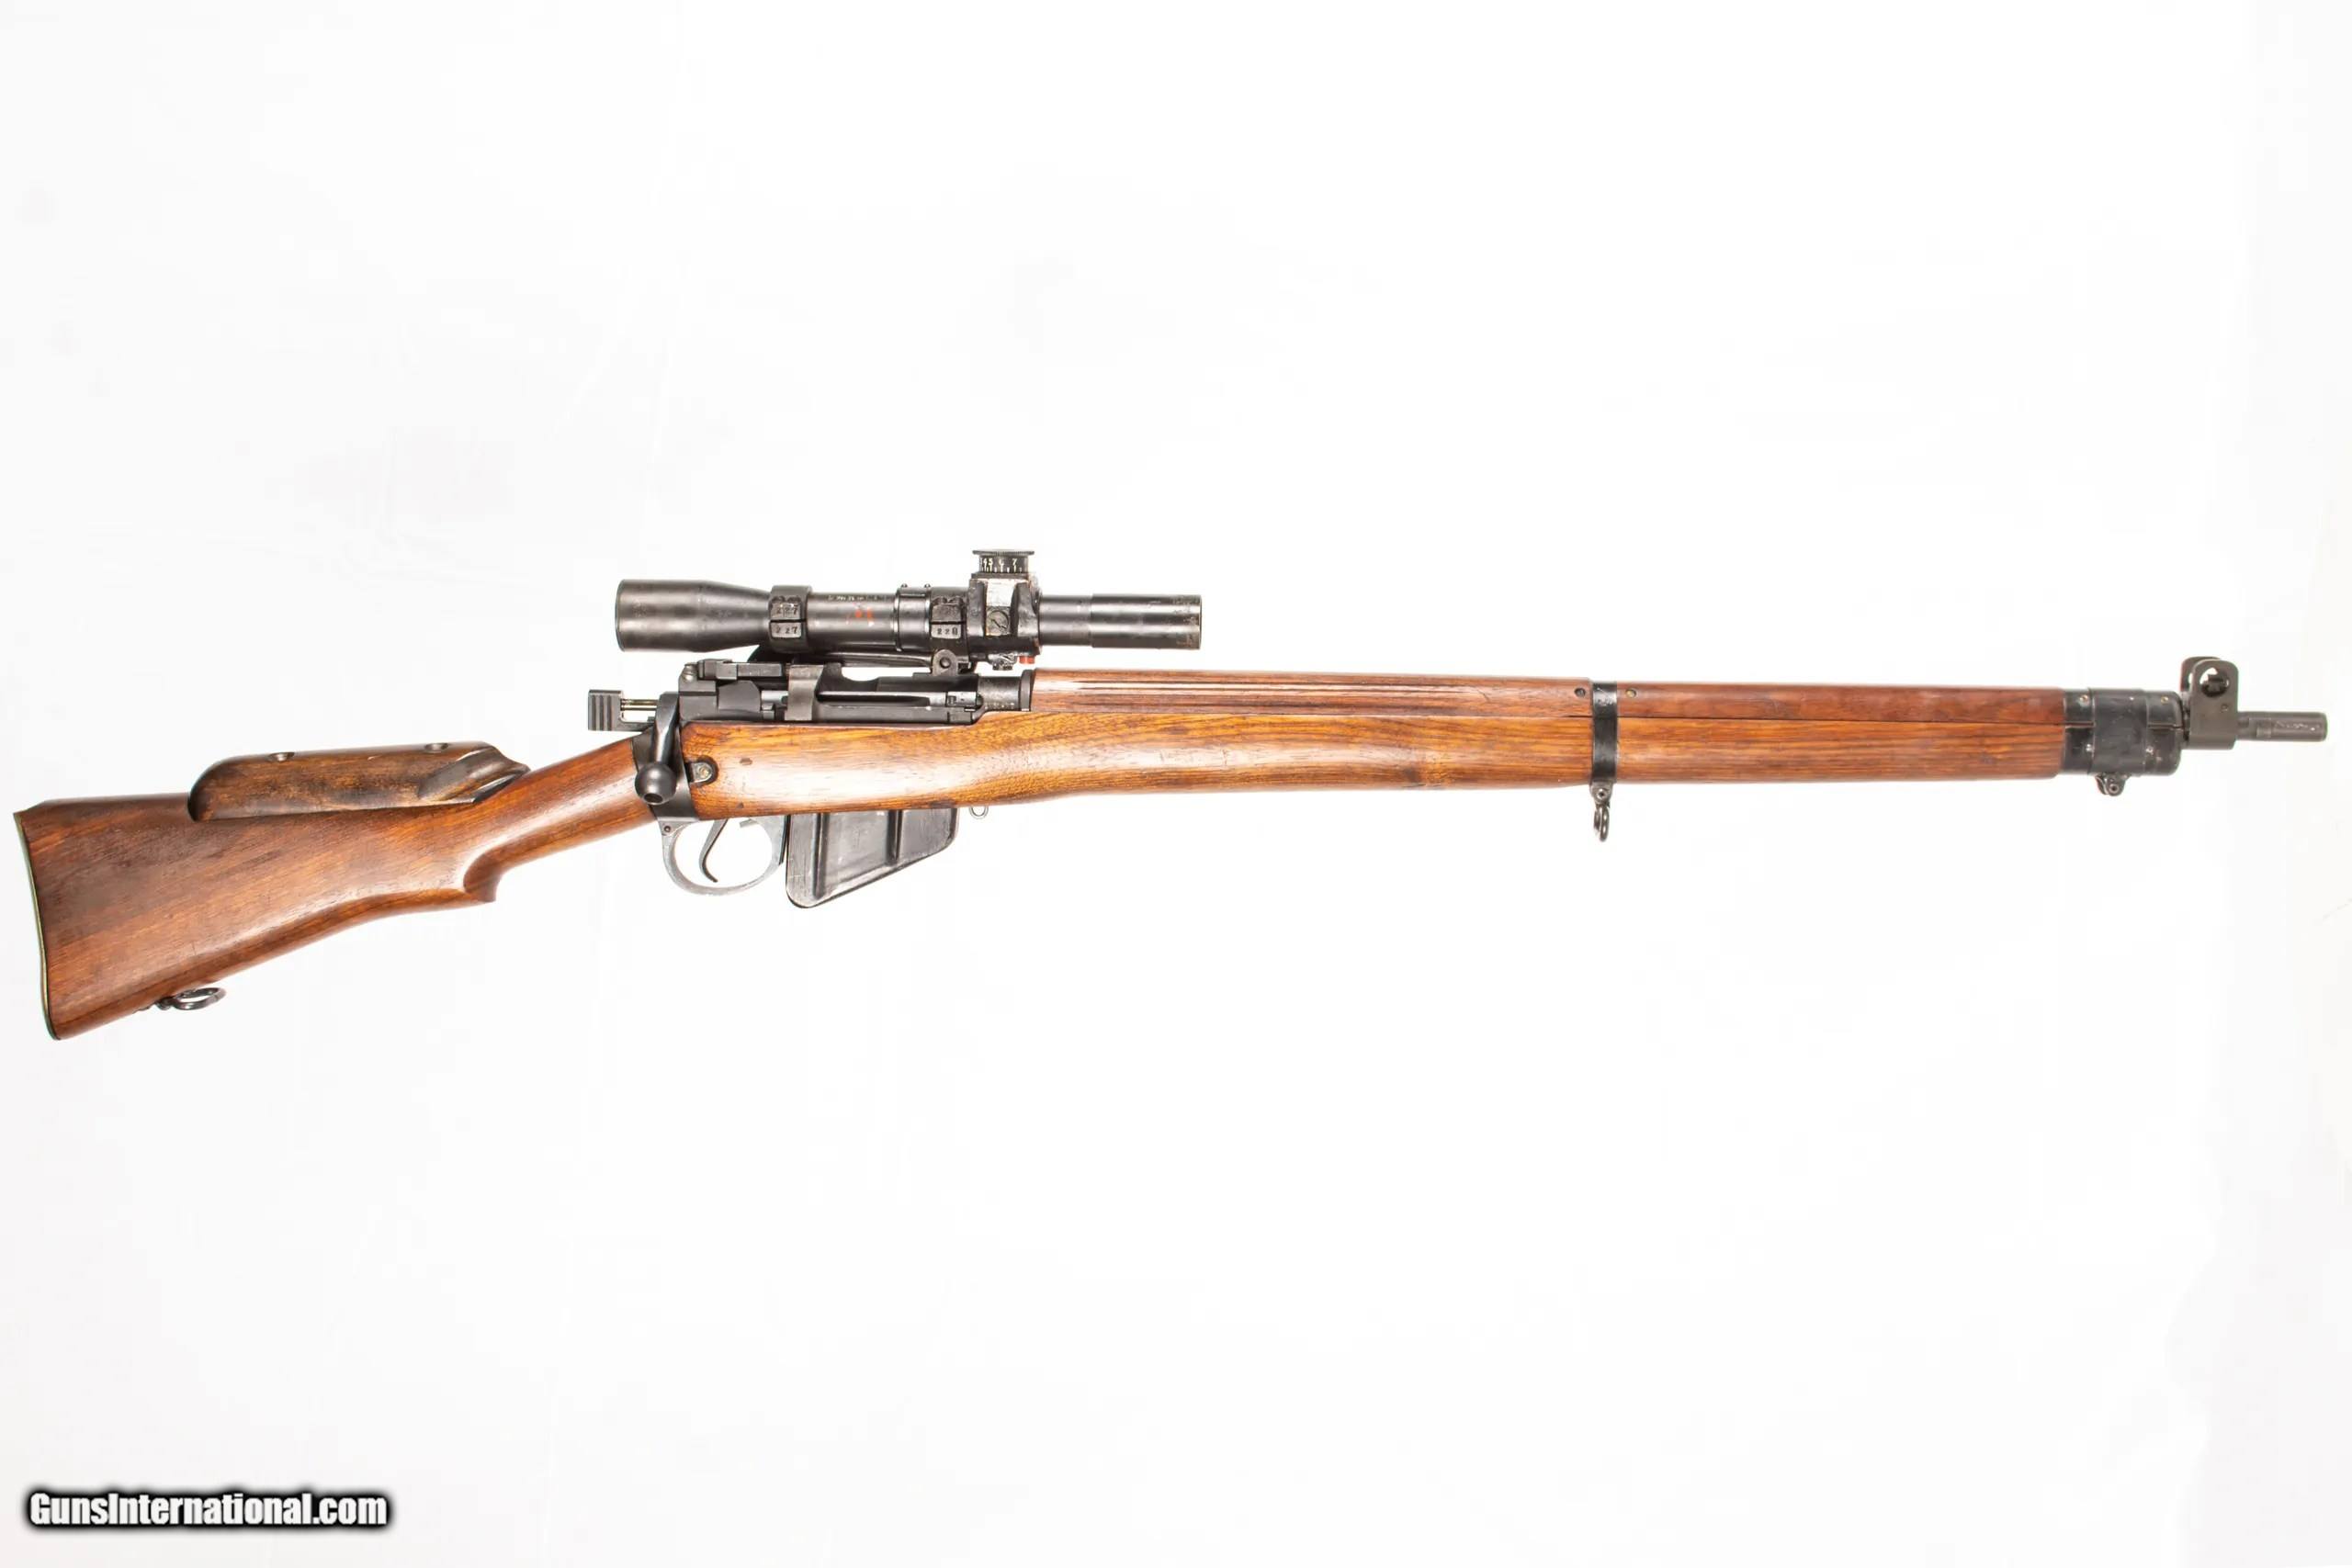 They should have put the lee-enfield sniper as British second